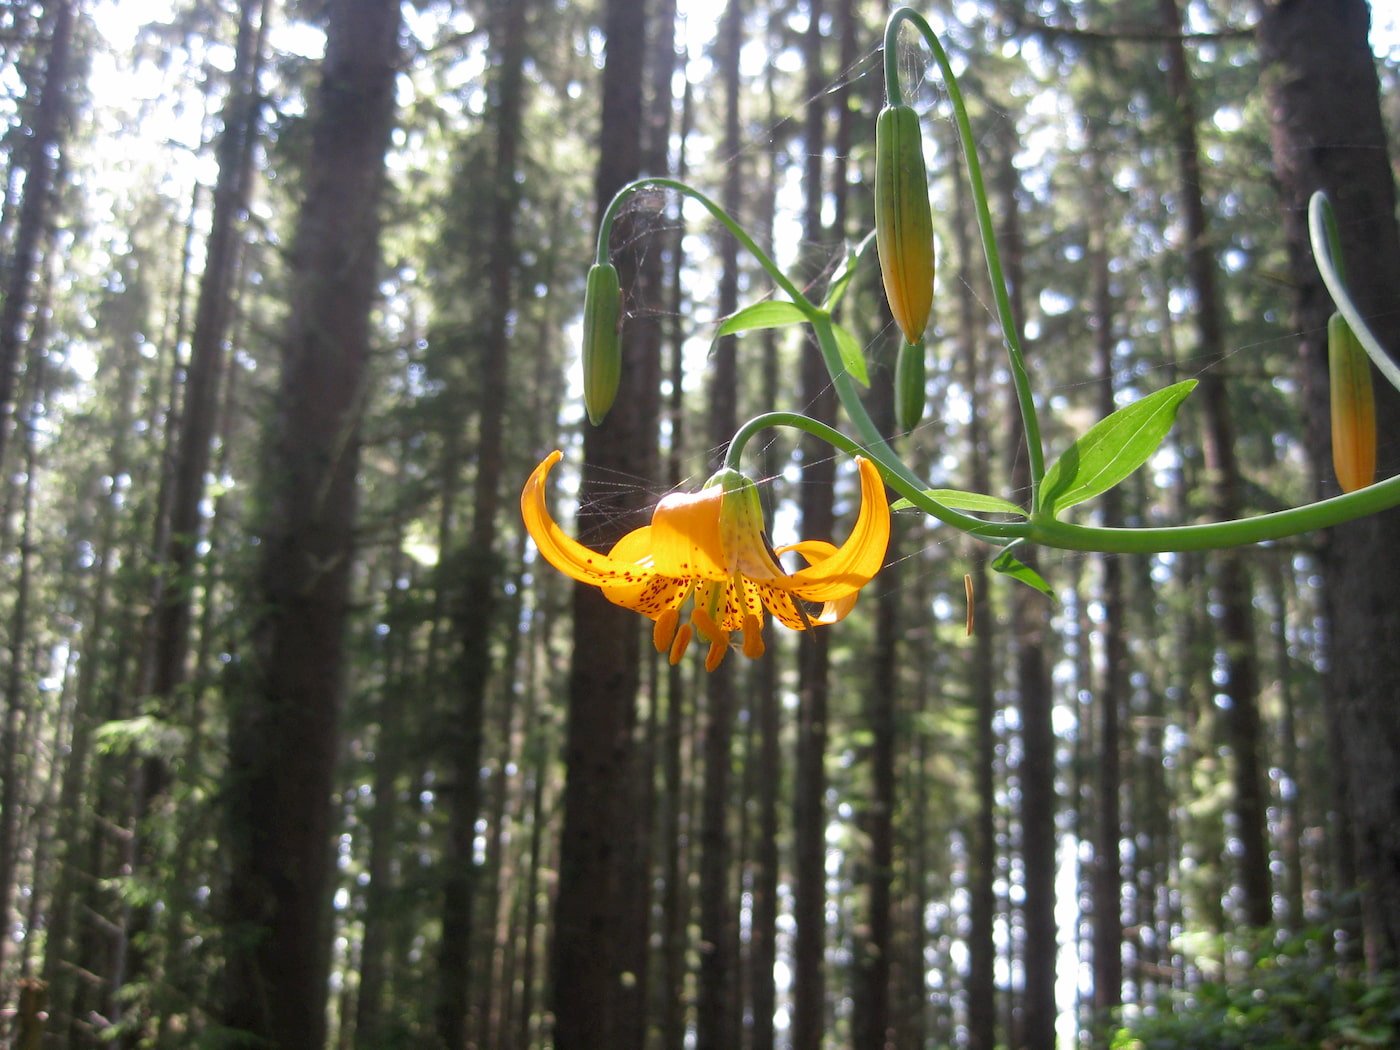 Leopard lily is a wildflower found in redwoods forests. 